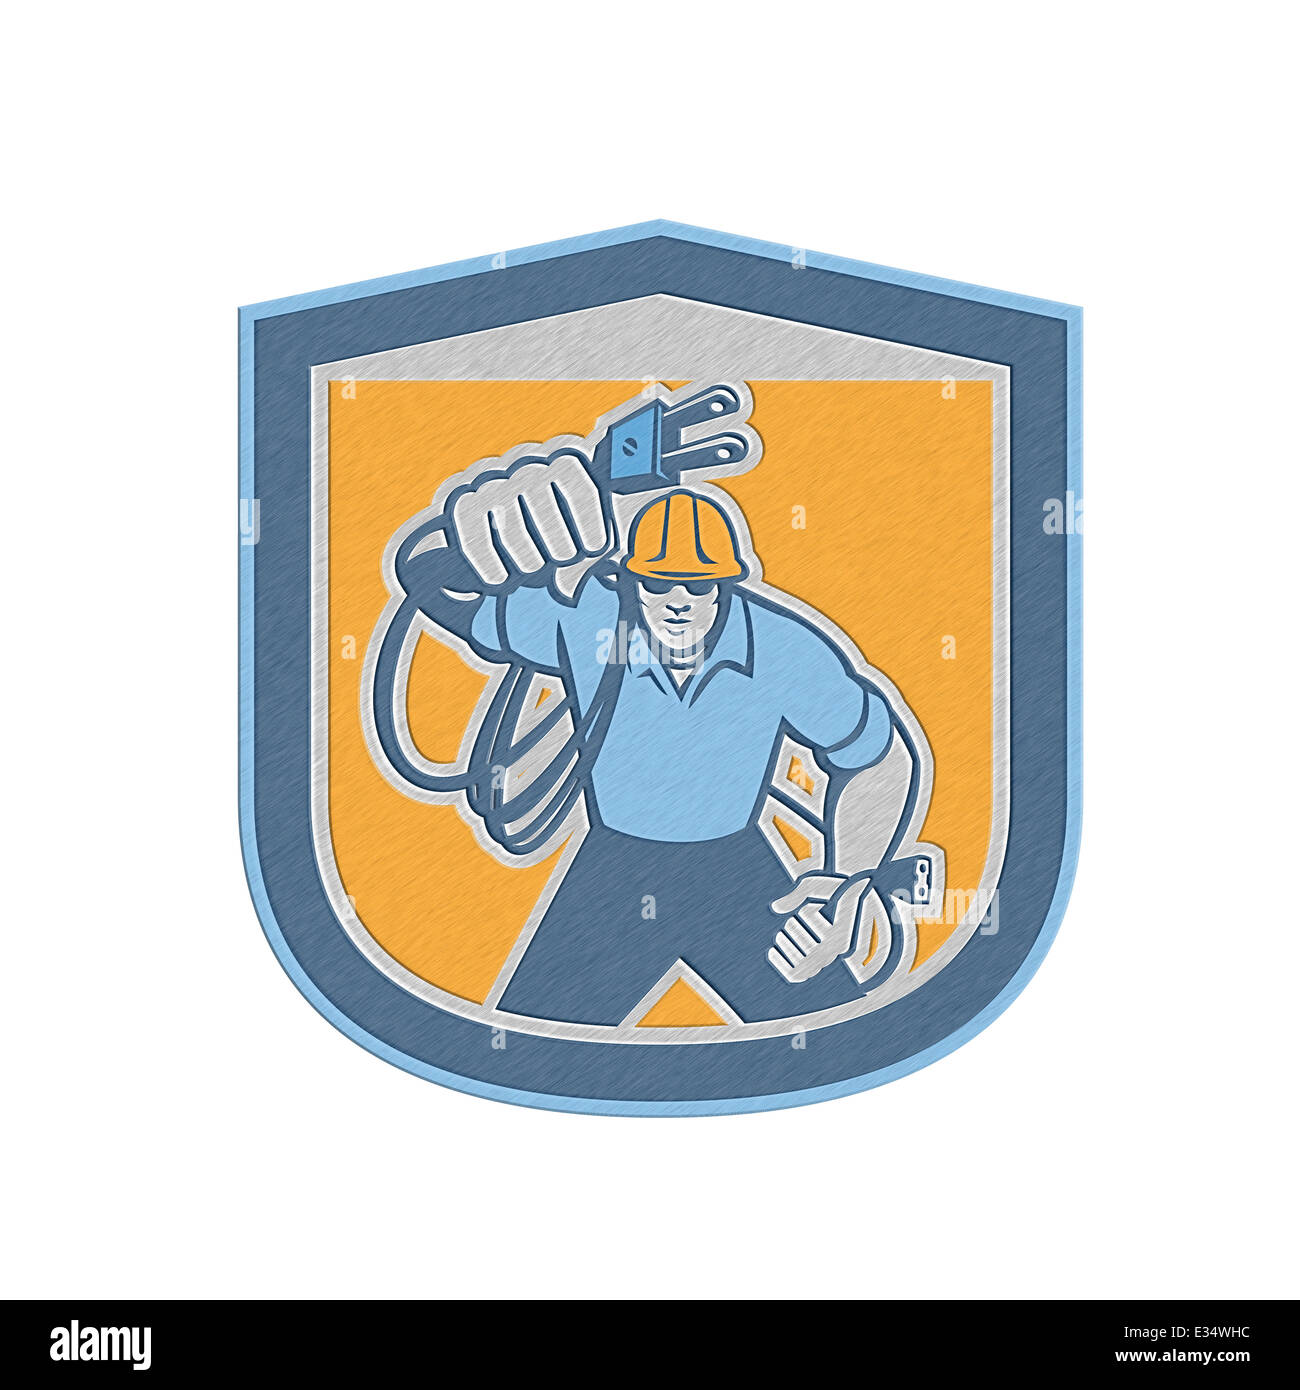 Metallic styled illustration of a electrician worker with electric plug cord facing front set inside shield crest on isolated background done in retro style. Stock Photo